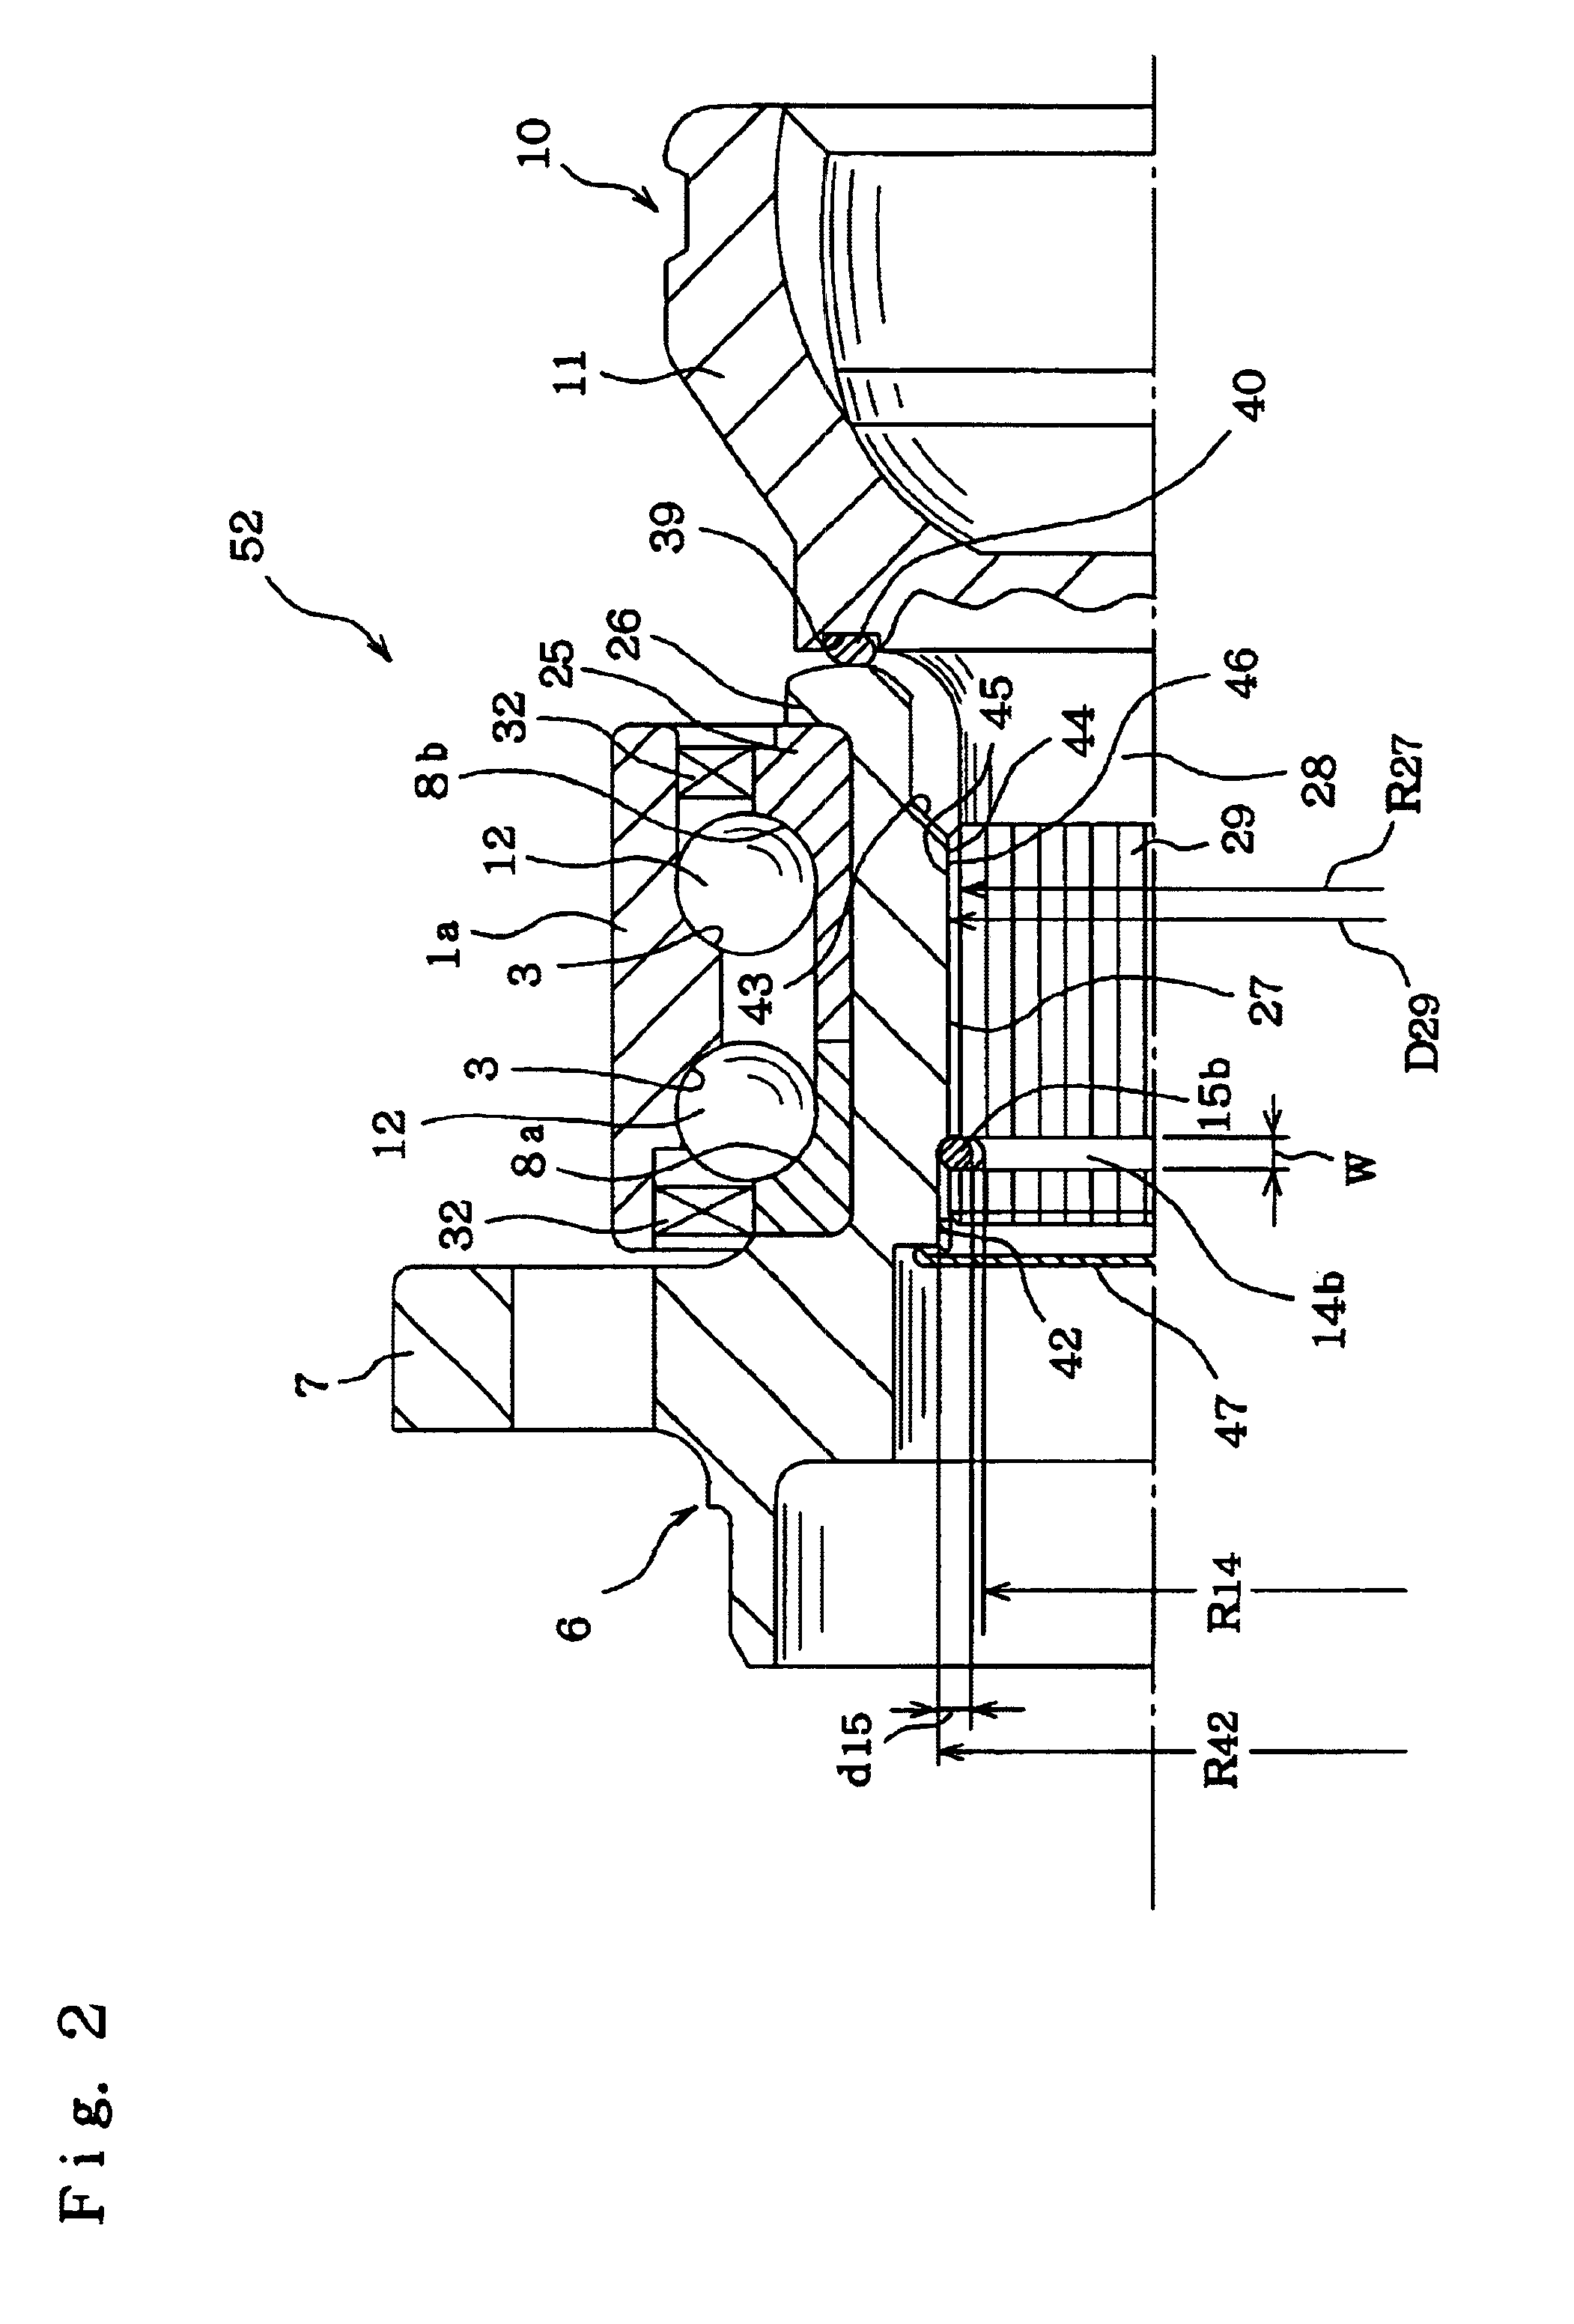 Drive unit for wheel and assembly method for the same